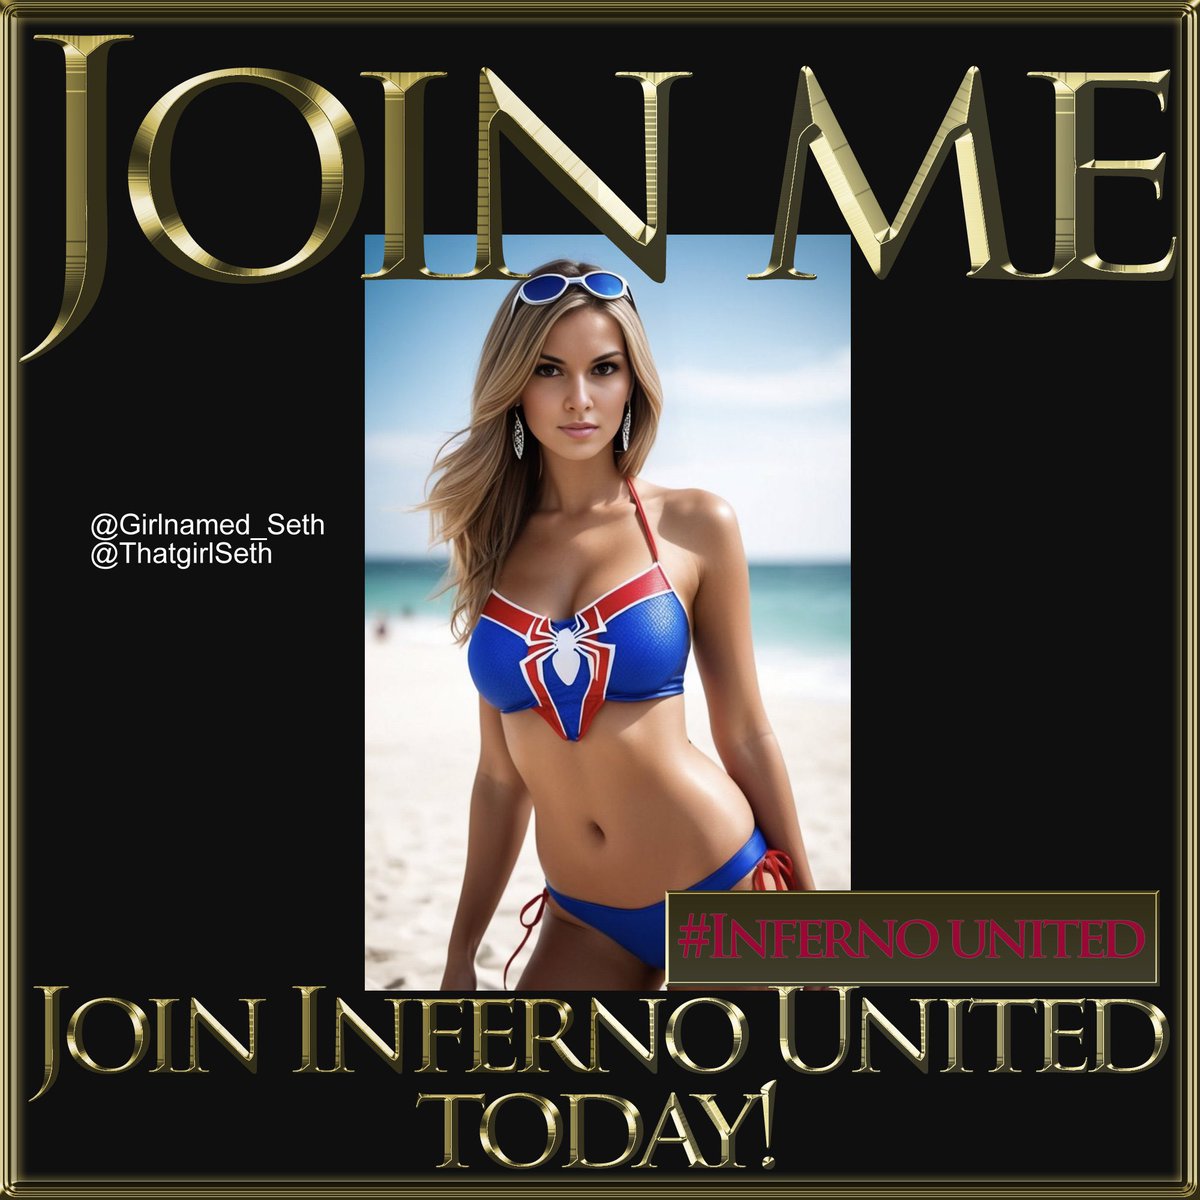 🚨Atten Patriots 🚨
#InfernoUnited
Join today if your a MAGA Patriot and you support Trump 2024 we are looking for you! We have an excellent group of Patriots looking to united with other Patriots all over the country! DM me if interested.
@girlnamed_Seth 
Or @j0ker937